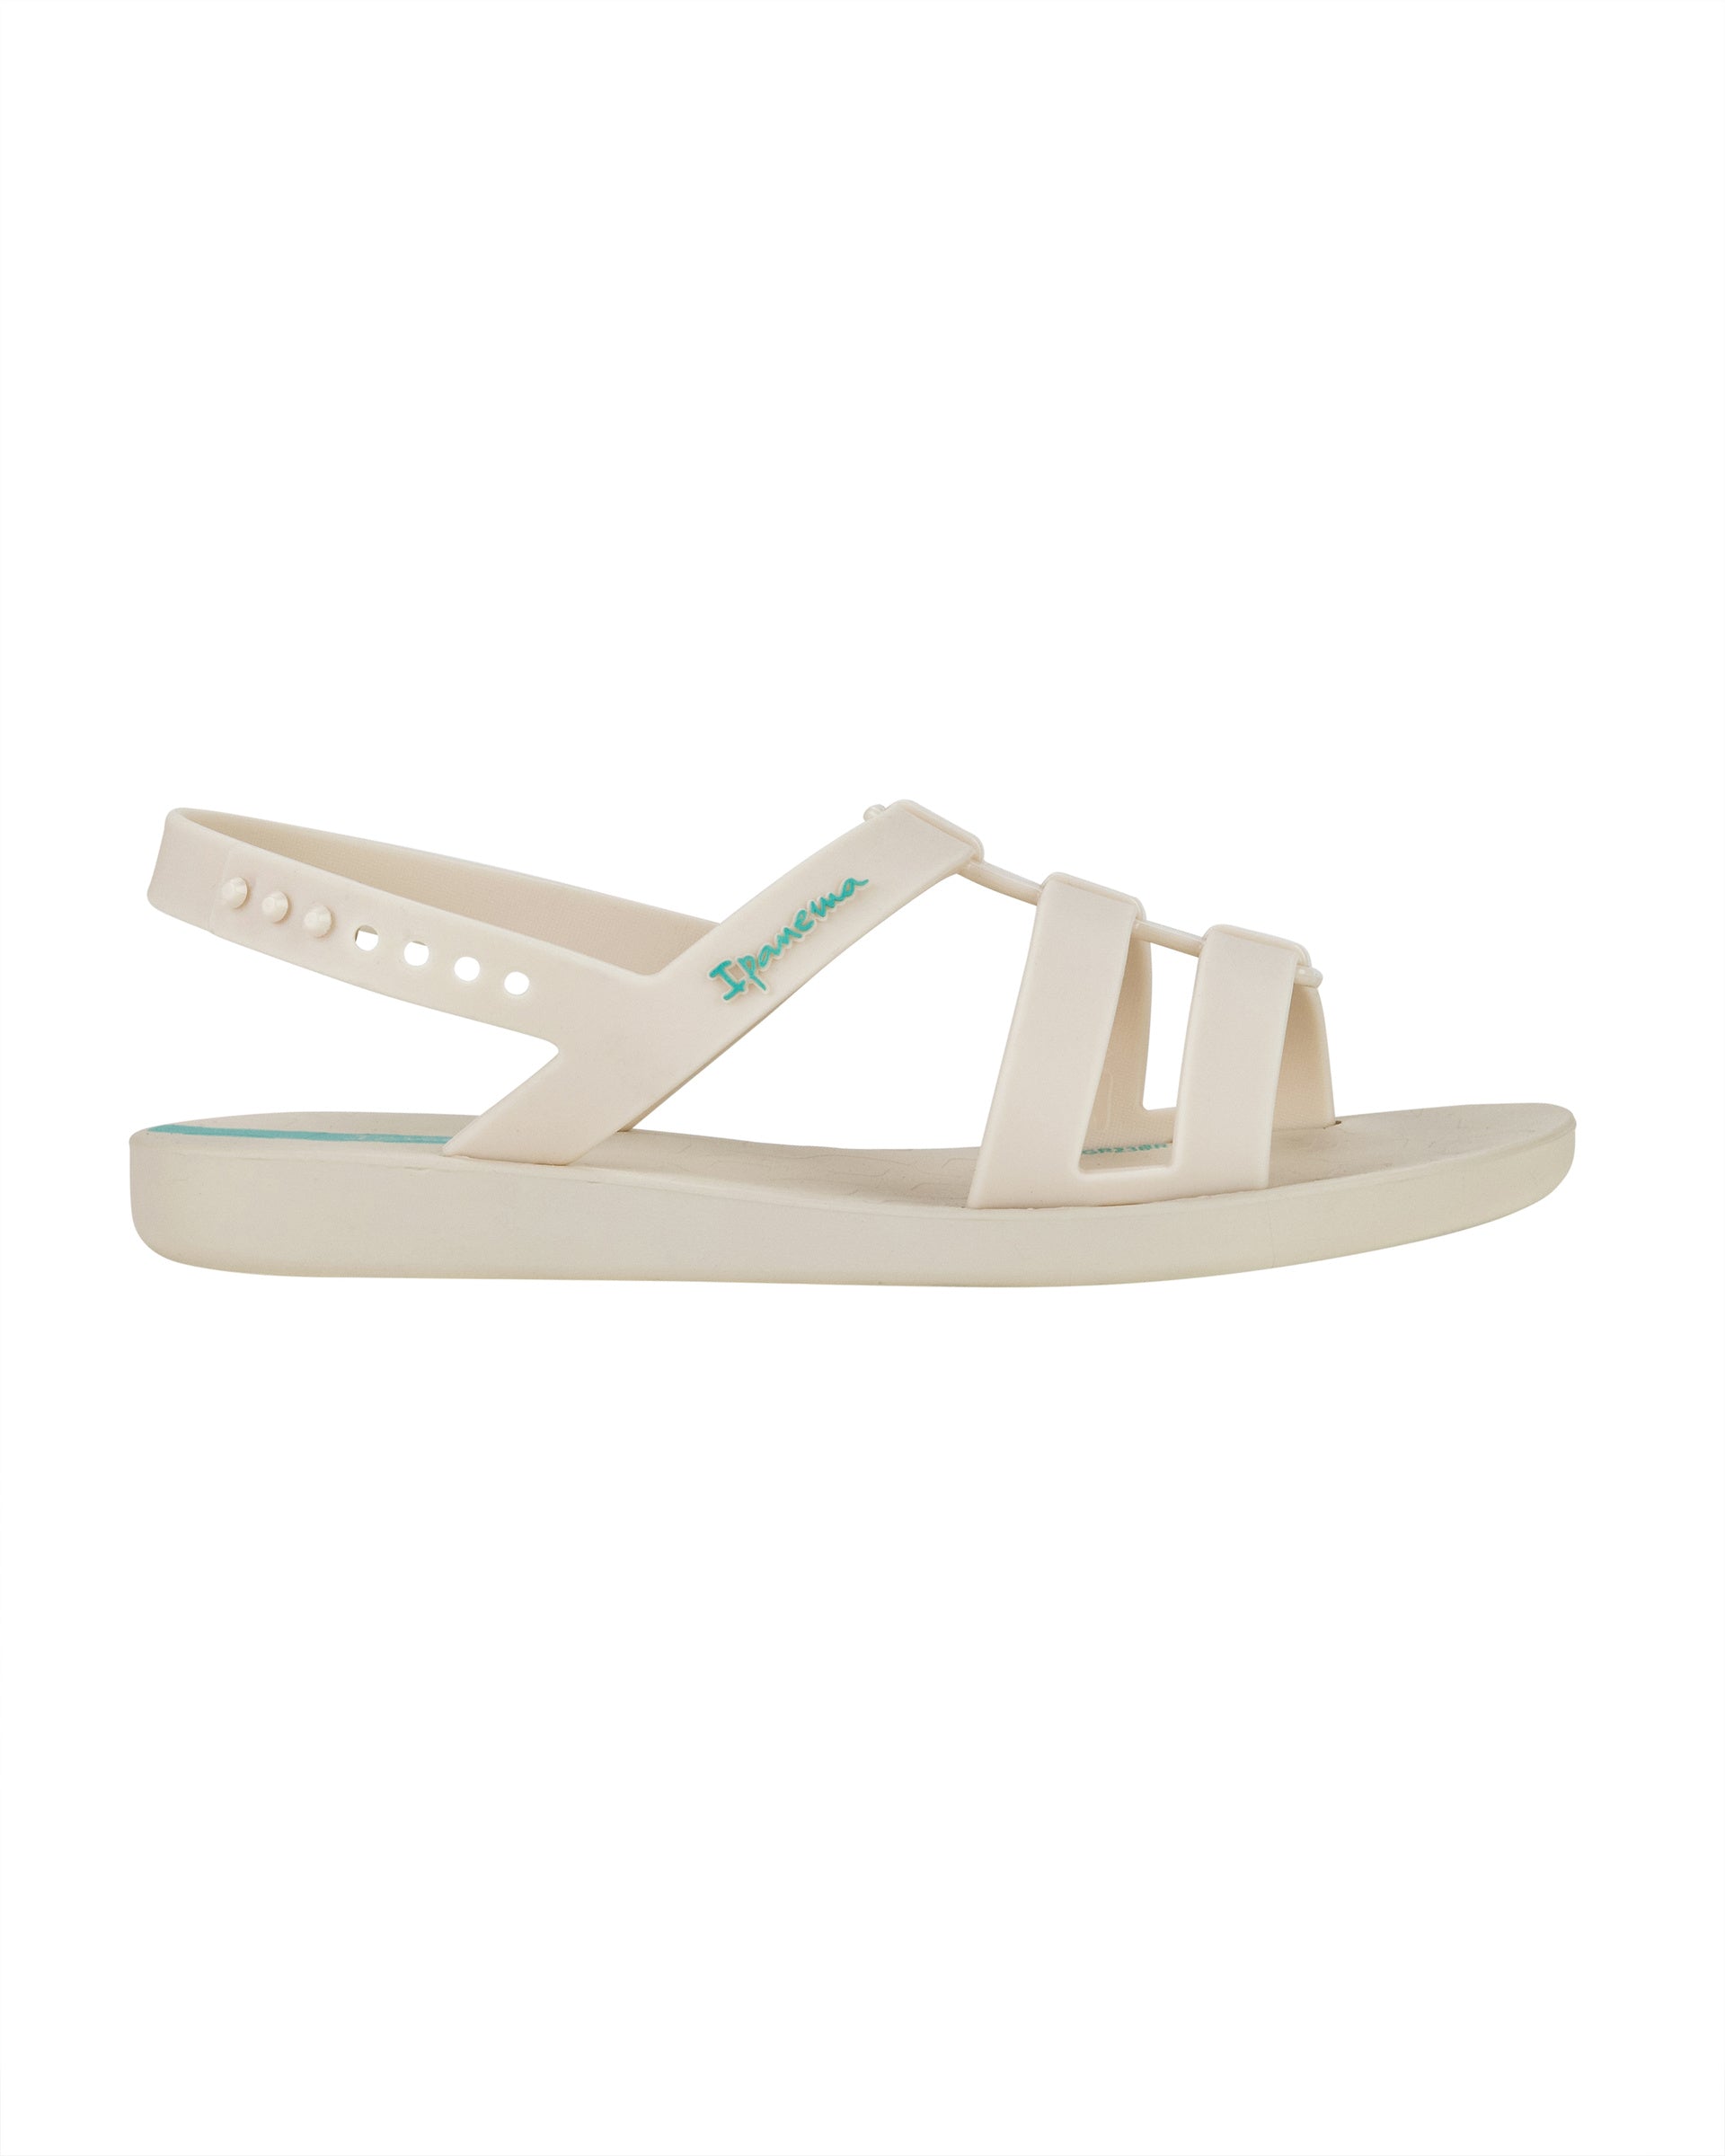 Outer side view of a beige Ipanema Class Go women's sandal.